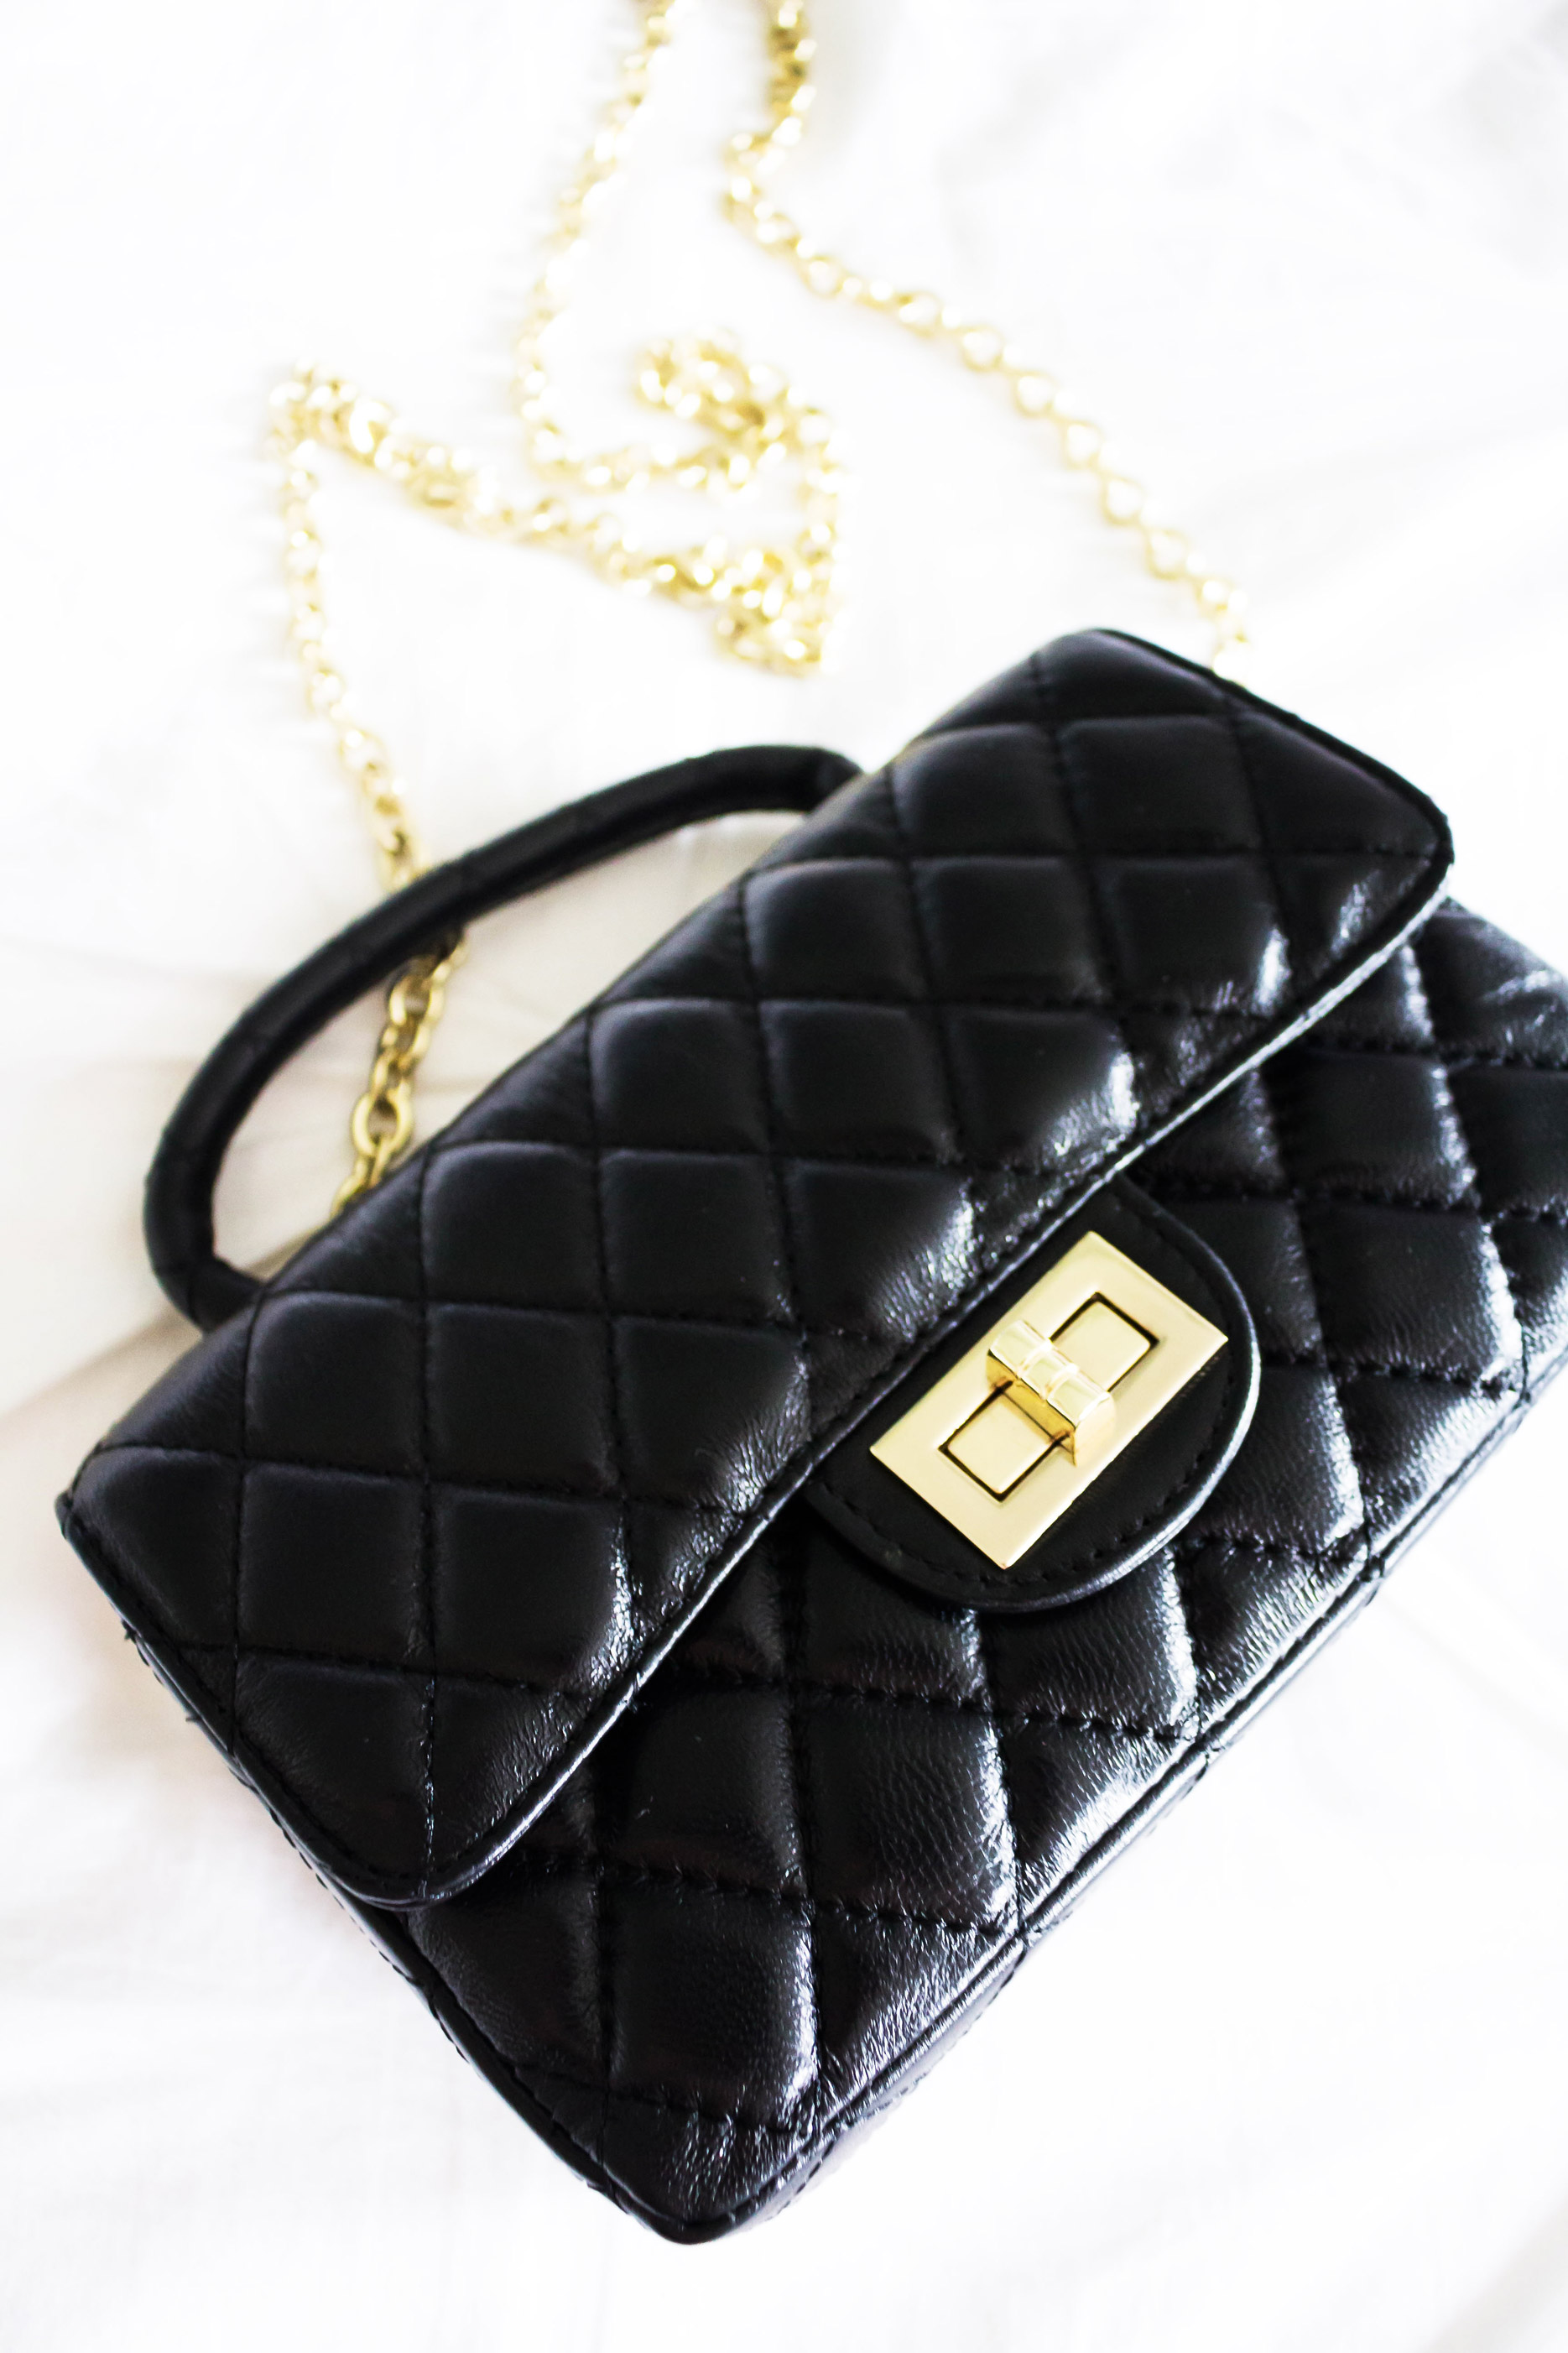 Best 25+ Deals for Sac Chanel